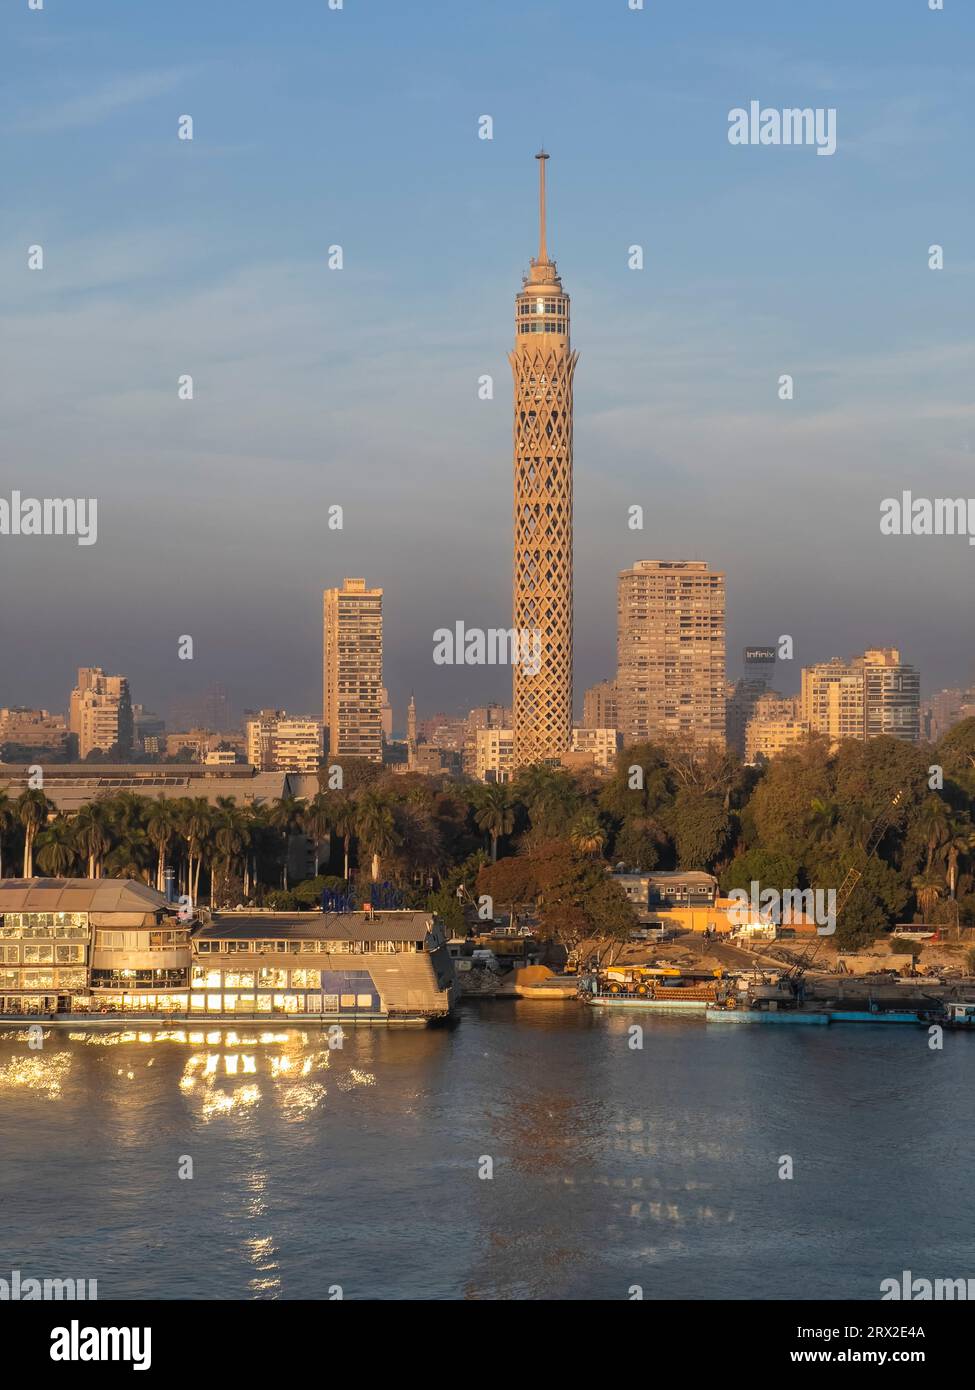 Cairo Tower, the tallest structure in Egypt and North Africa, rising 187 meters, Nile River, Cairo, Egypt, North Africa, Africa Stock Photo